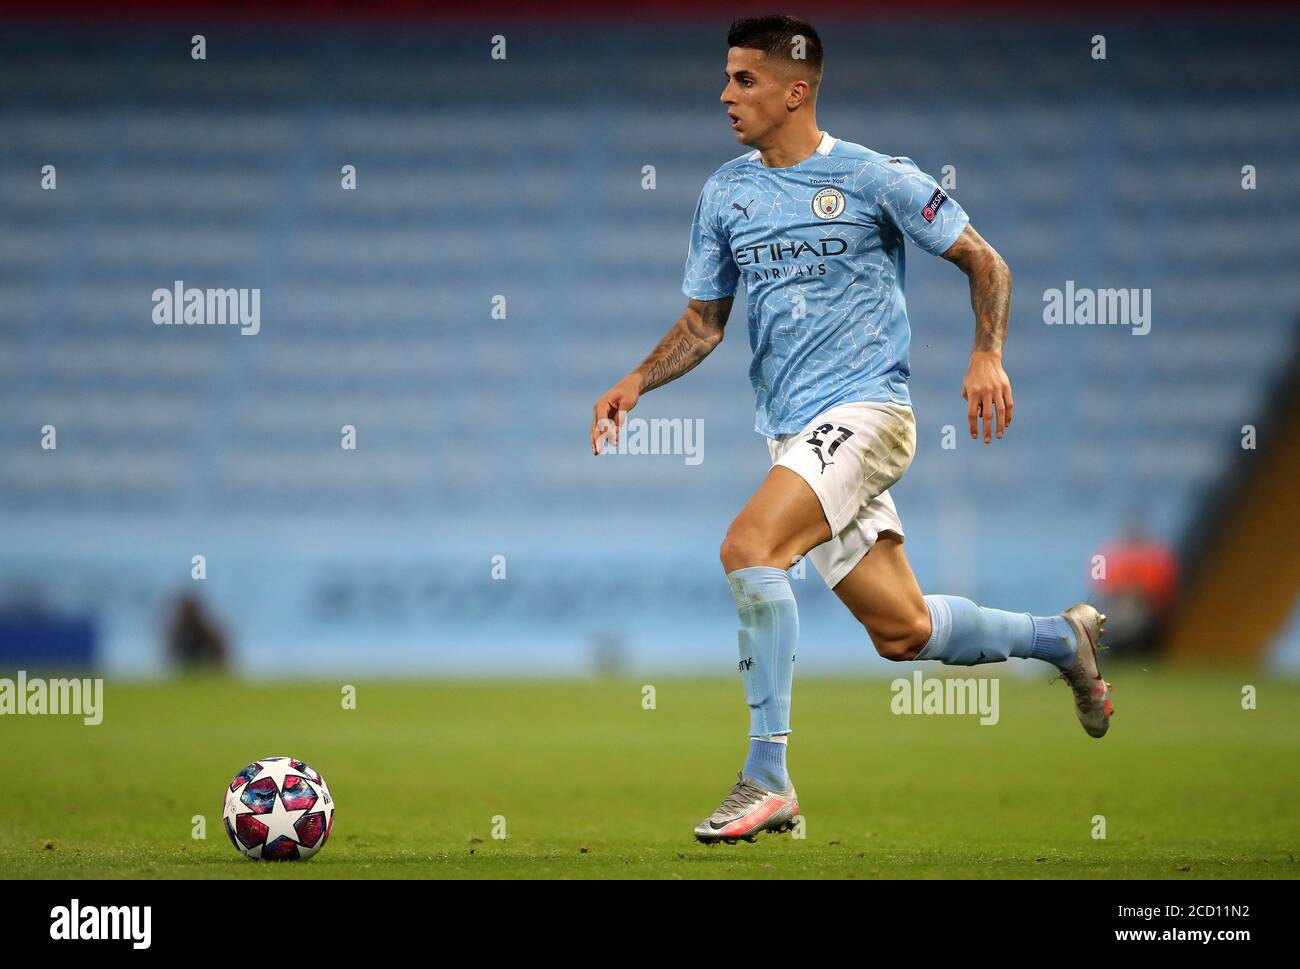 Manchester City's Joao Cancelo during the UEFA Champions League, round of 16, second leg match at the Etihad Stadium, Manchester. Friday August 7, 2020. See PA story SOCCER Man City. Photo credit should read: Nick Potts/PA Wire. Stock Photo